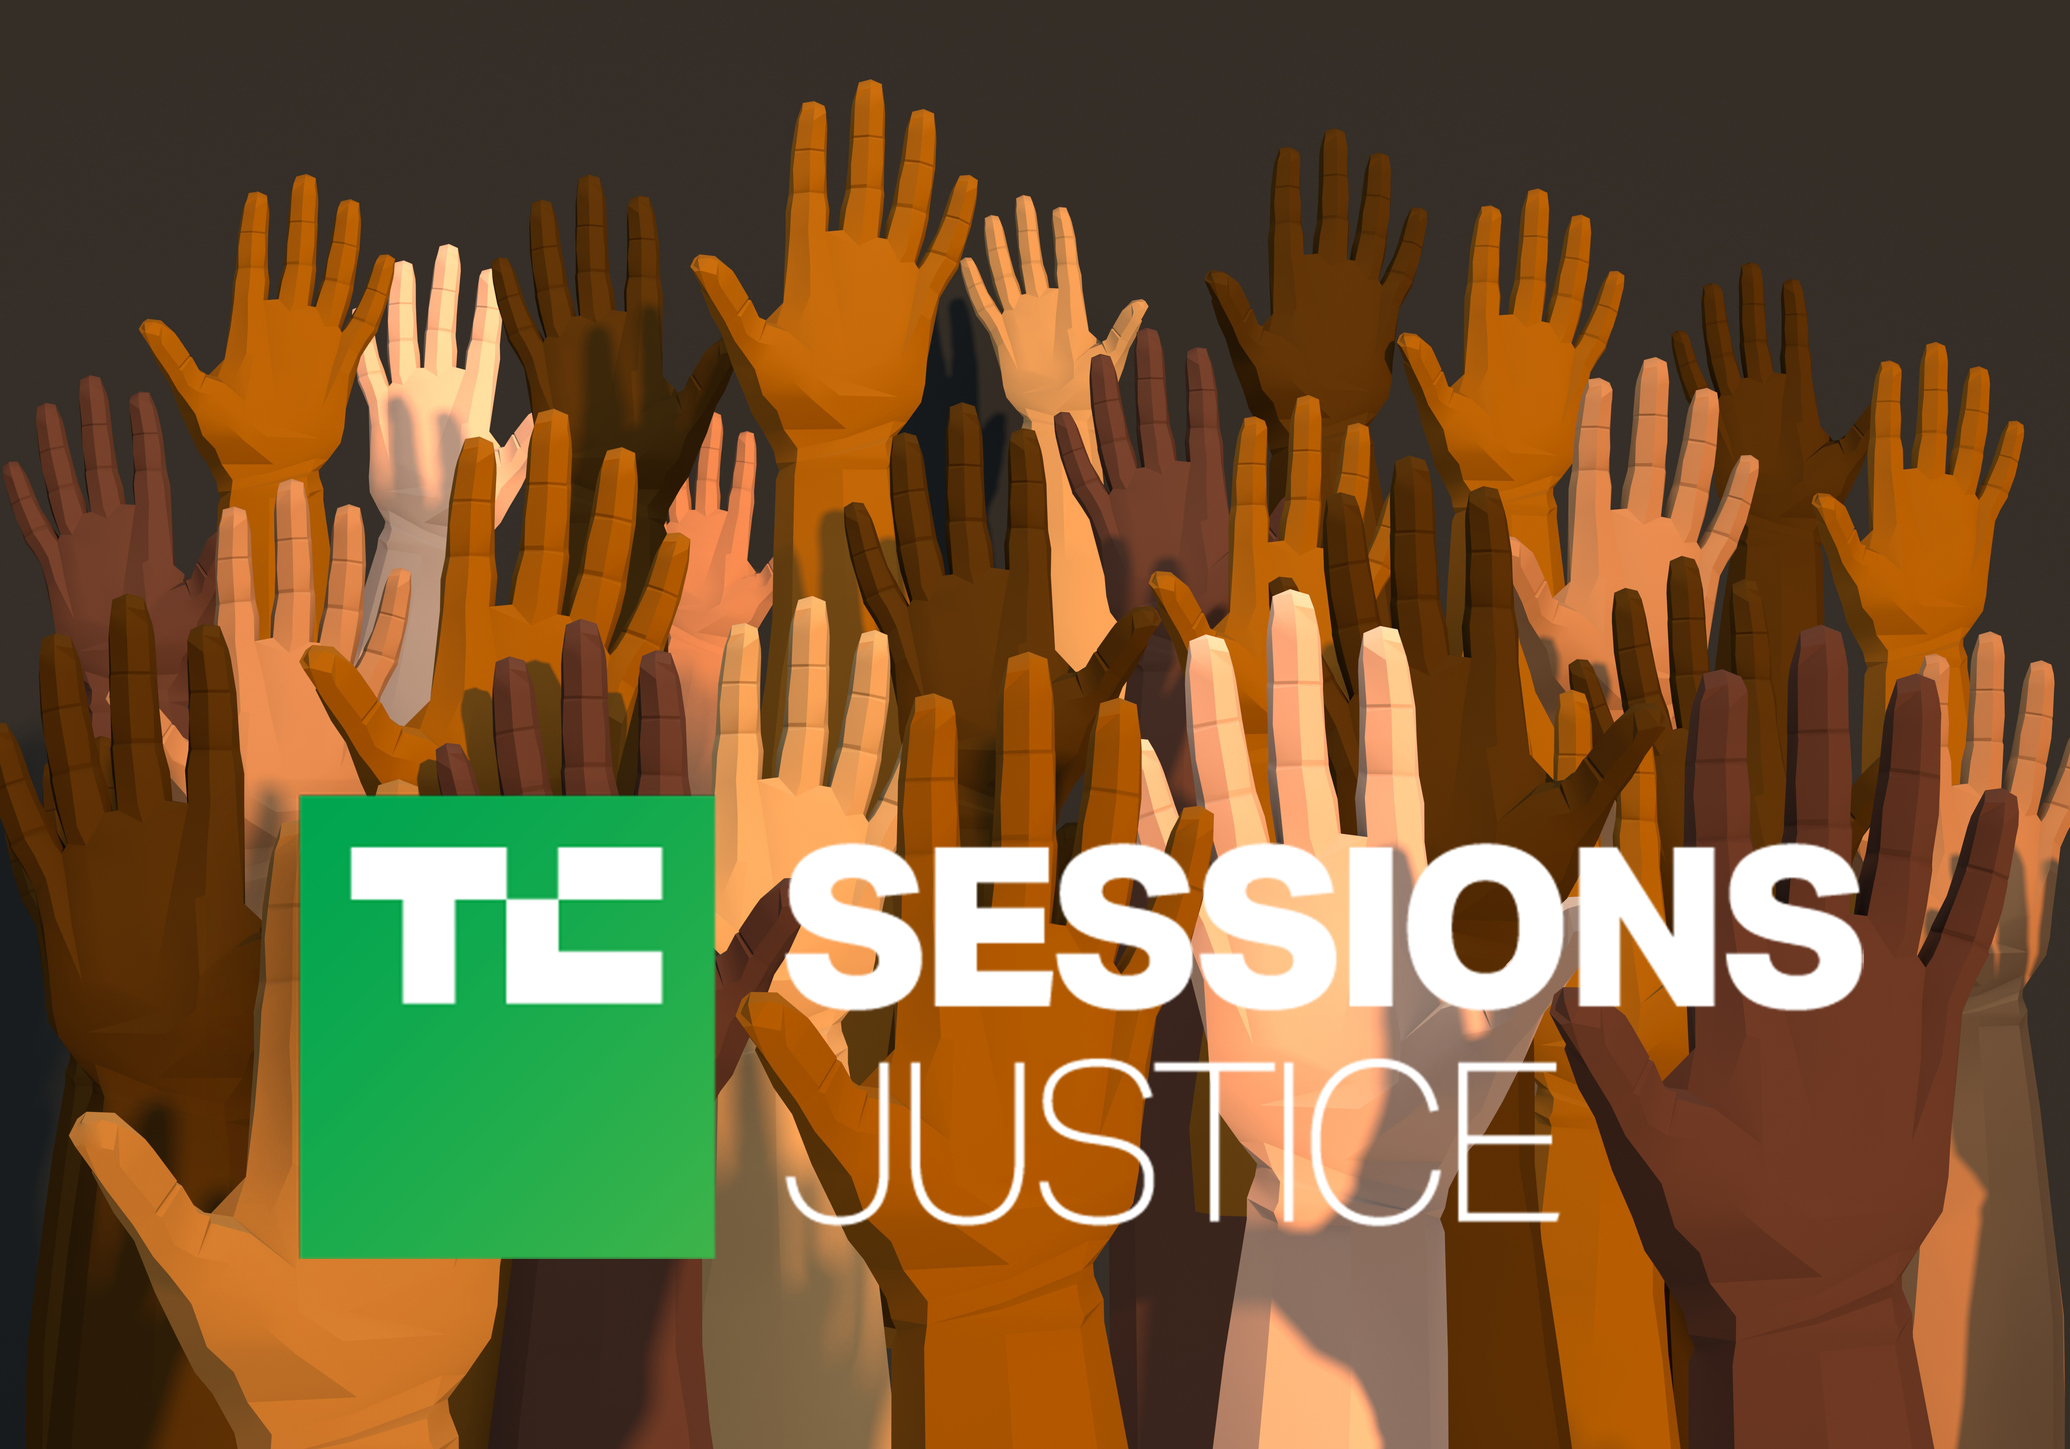 Hands raised TC Sessions Justice